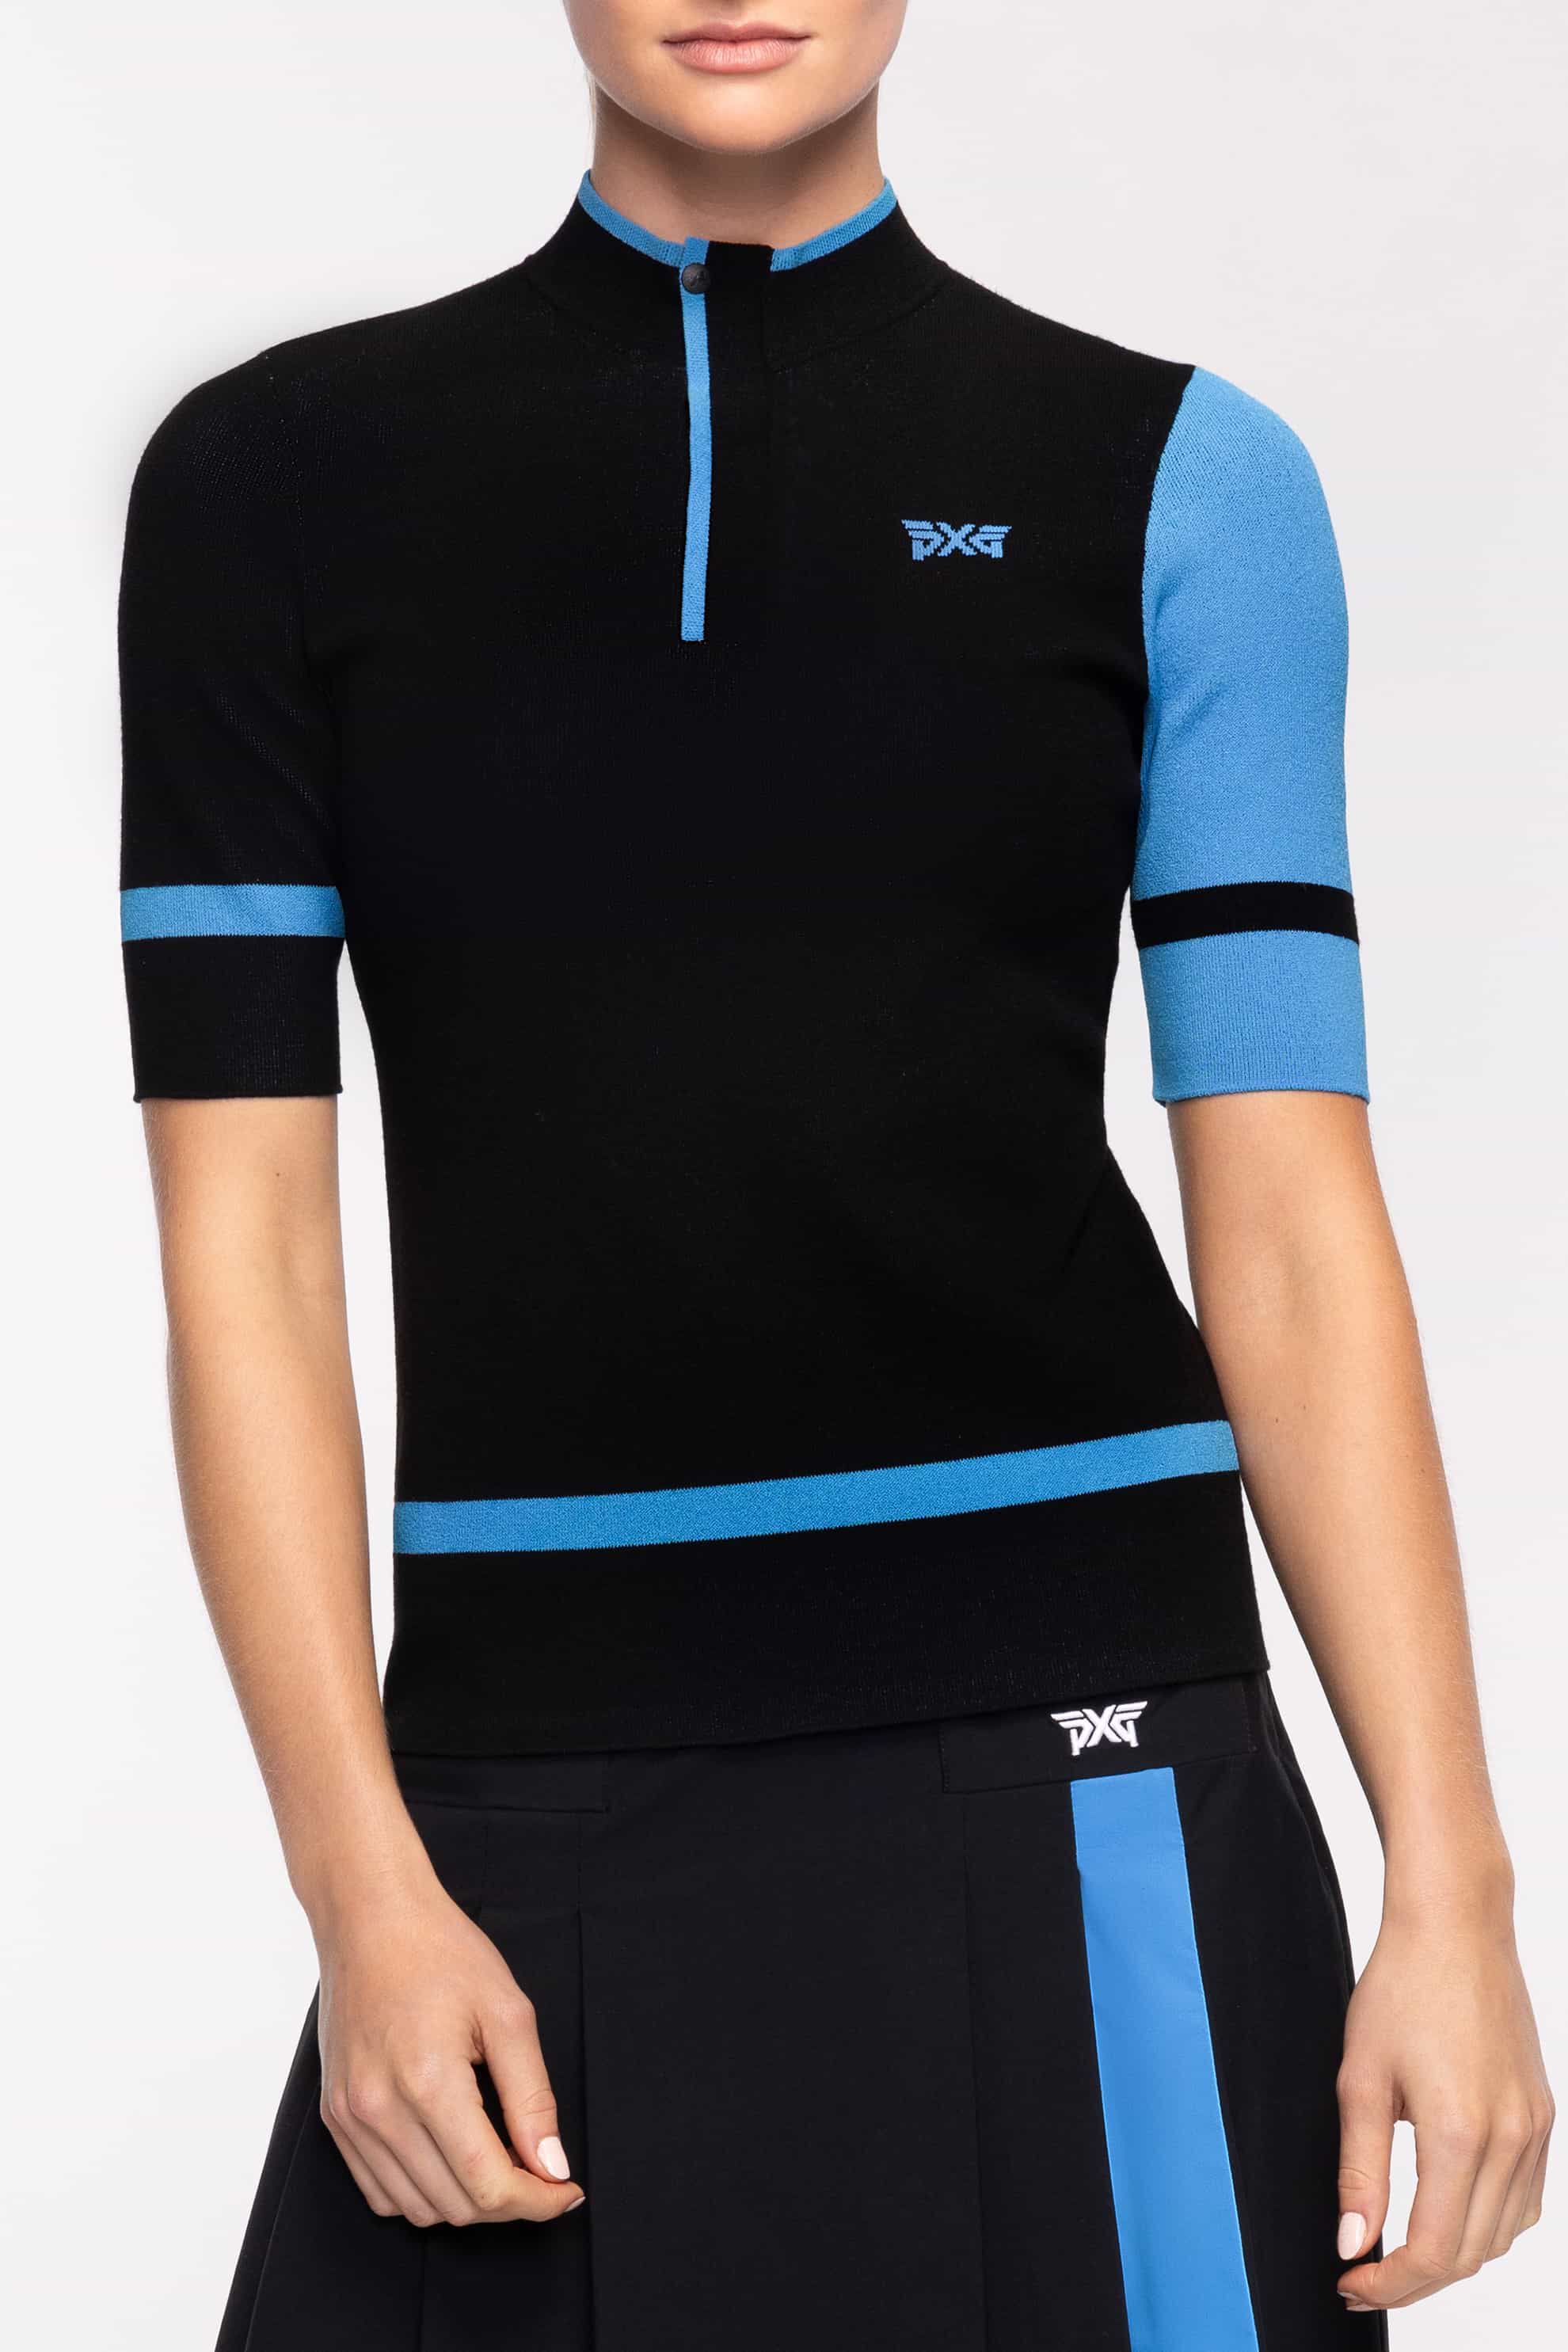 Shop Women's Golf Clothes and Apparel - Online or In-Store | PXG JP